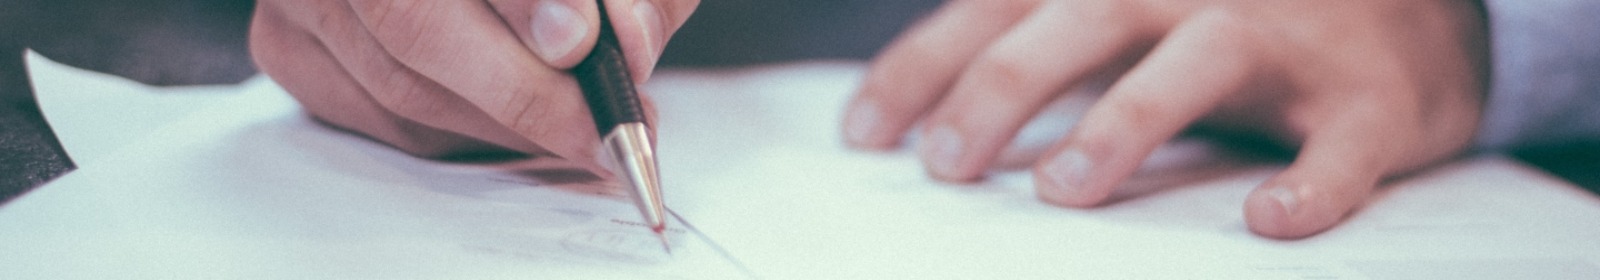 Person signing documents with a pen.